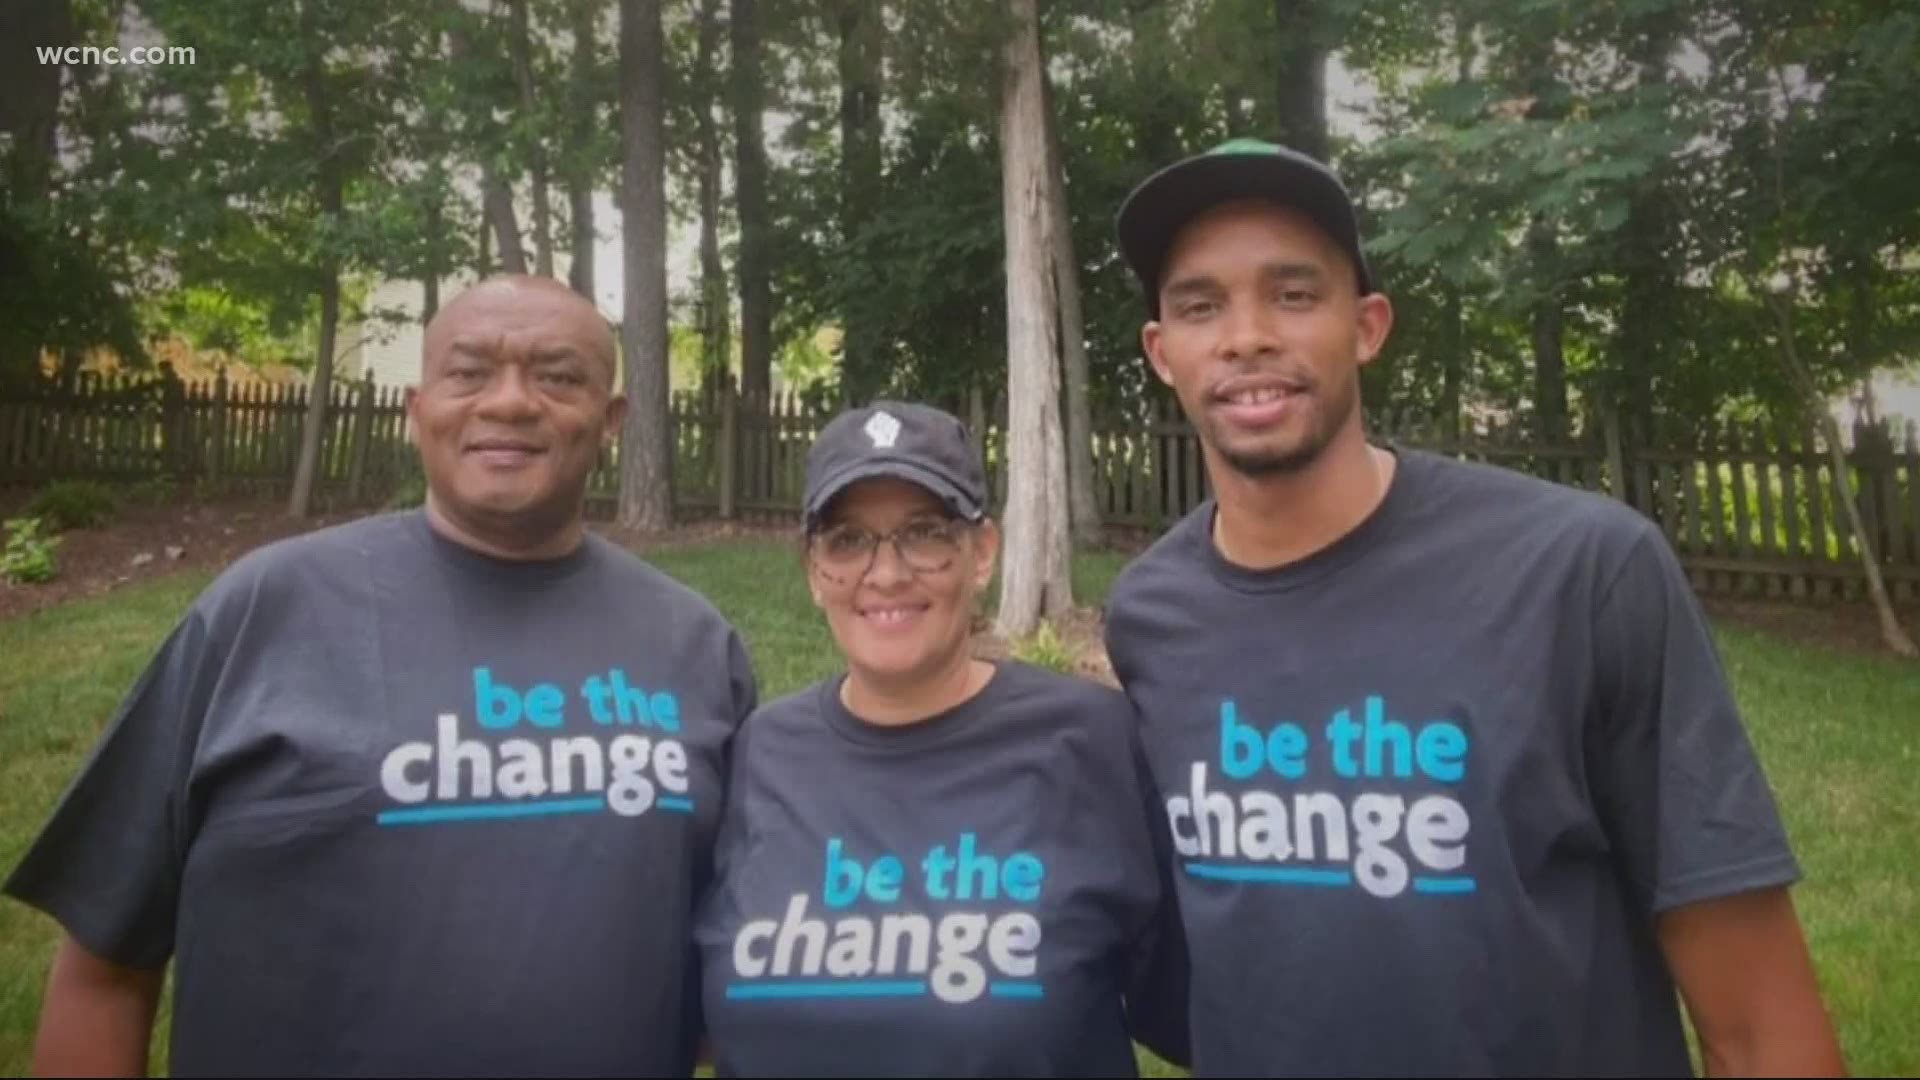 TIAA is a global financial services company that is confronting racial inequality by empowering employees to "be the change."